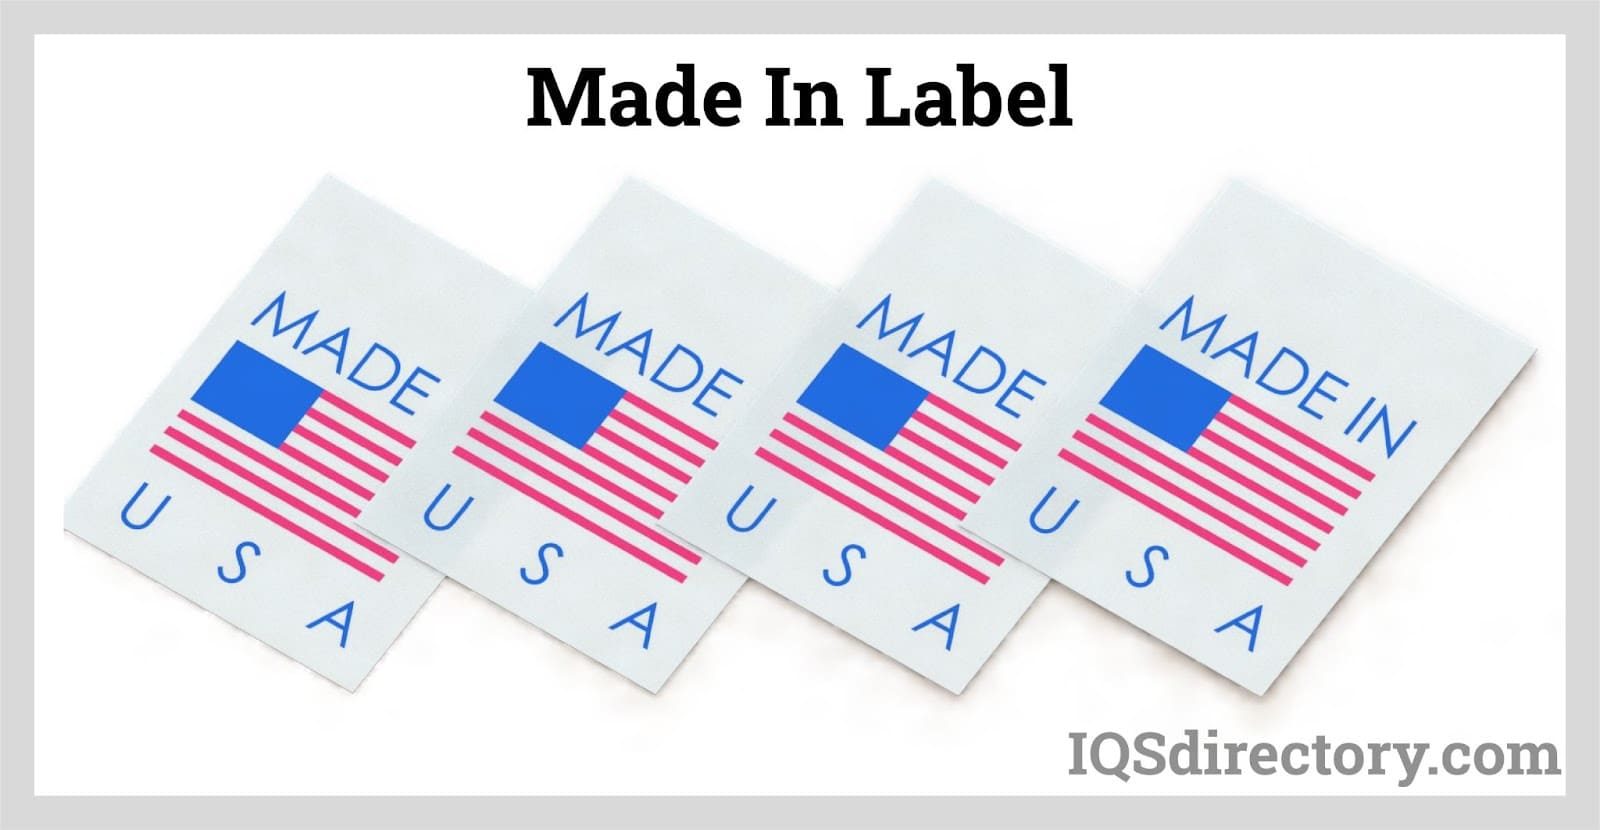 Made In Label